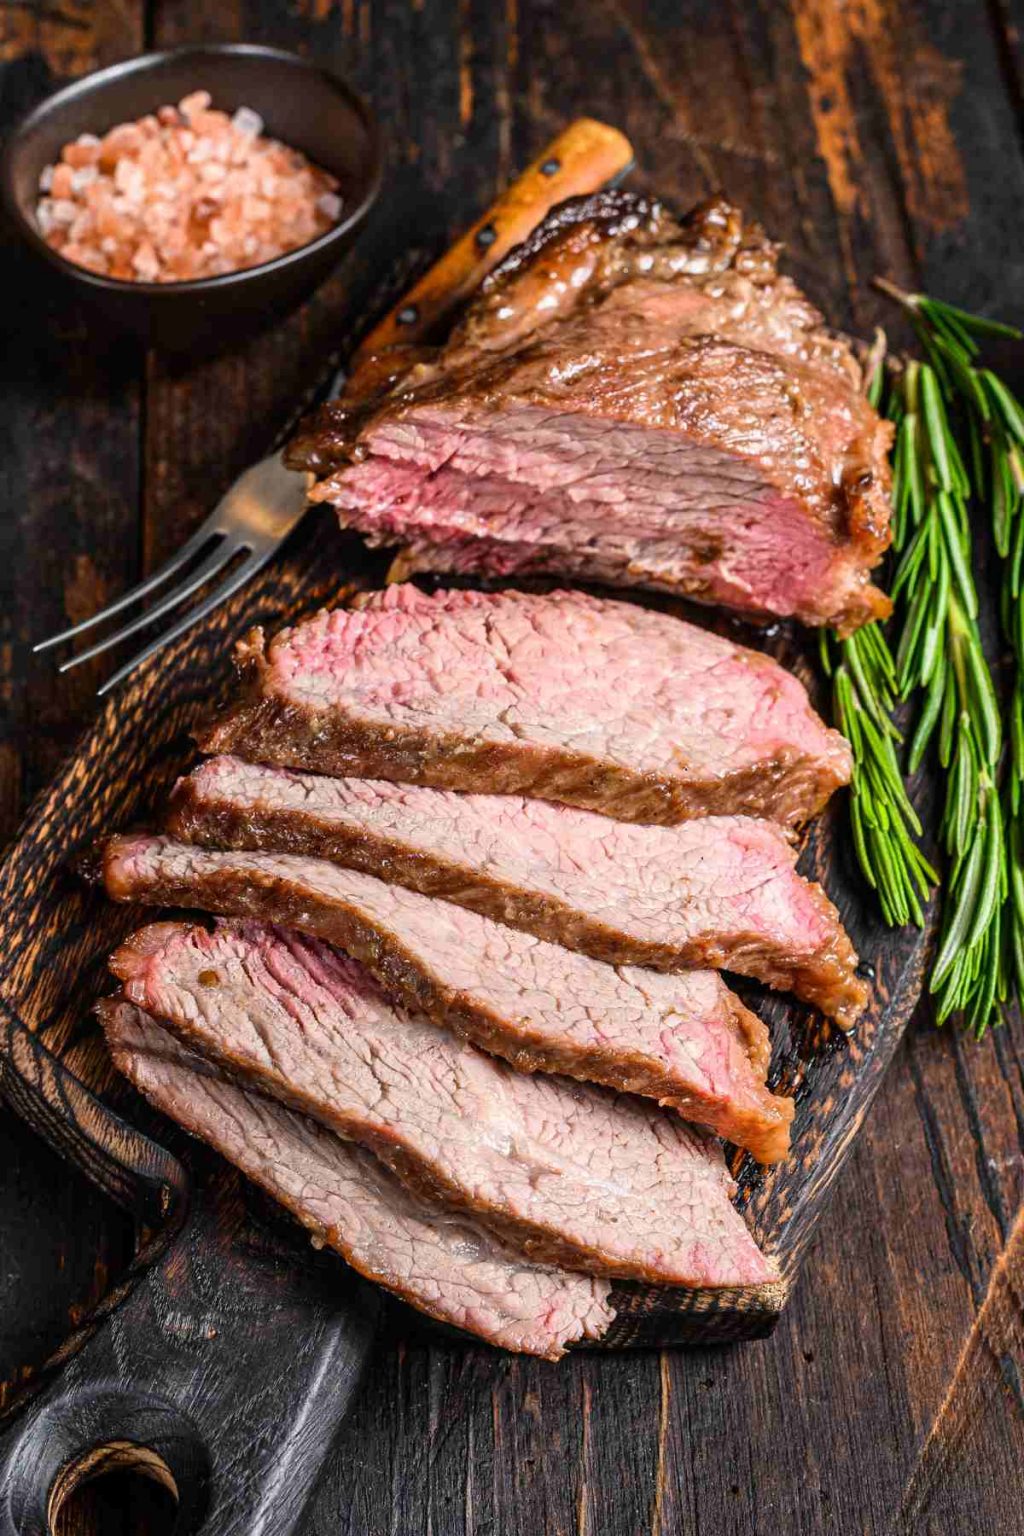 Tri Tip Internal Temperature How To Know When Your Tri Tip Steak Is Done Cooking Izzycooking